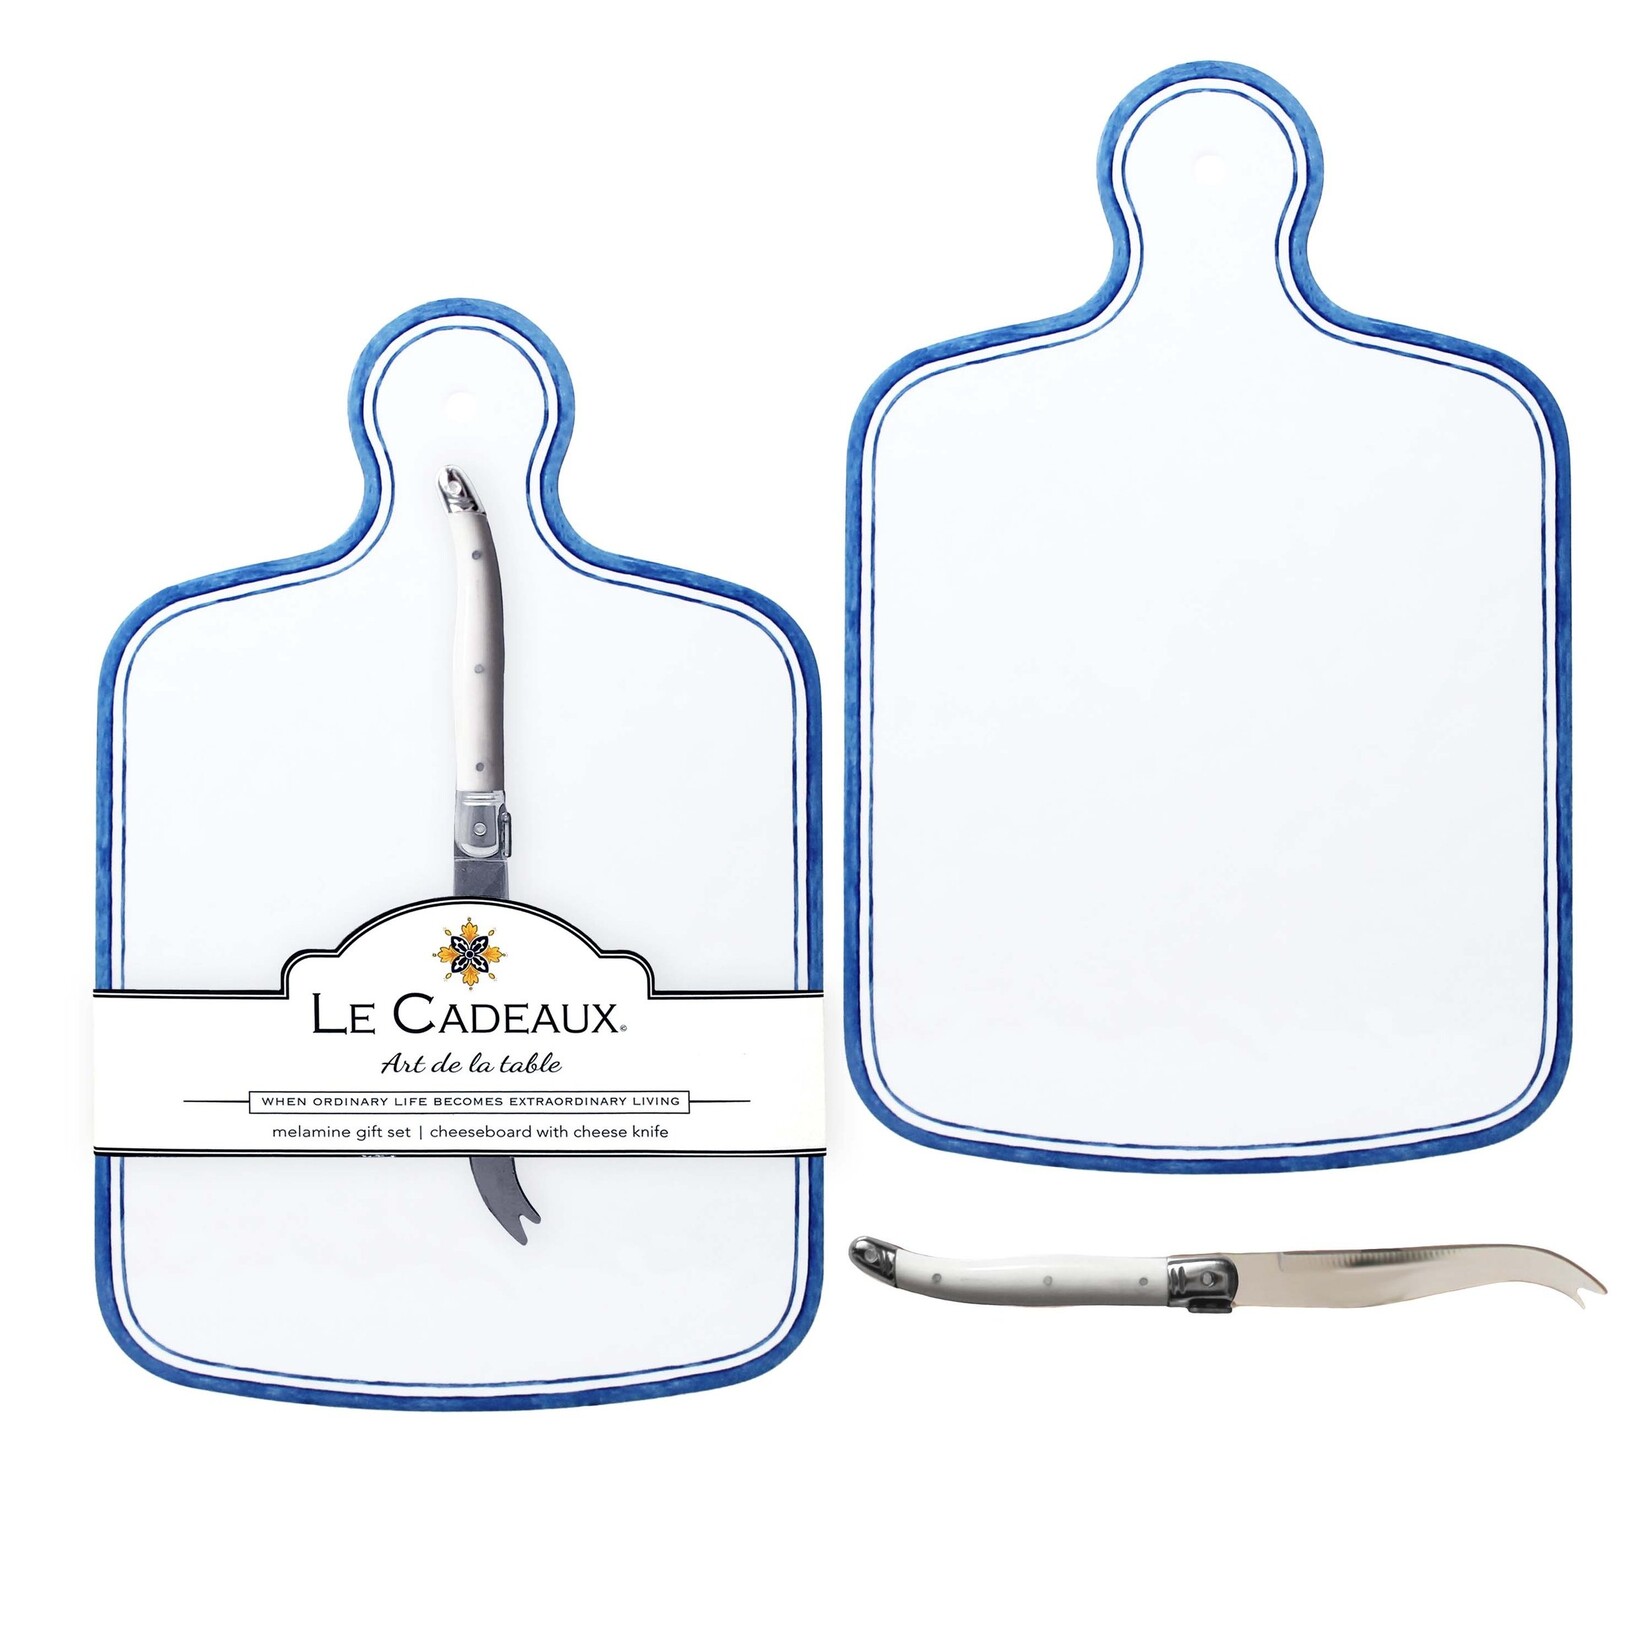 Le Cadeaux Le Cadeaux Maison Cheese Board with Cheese Knife Gift Set